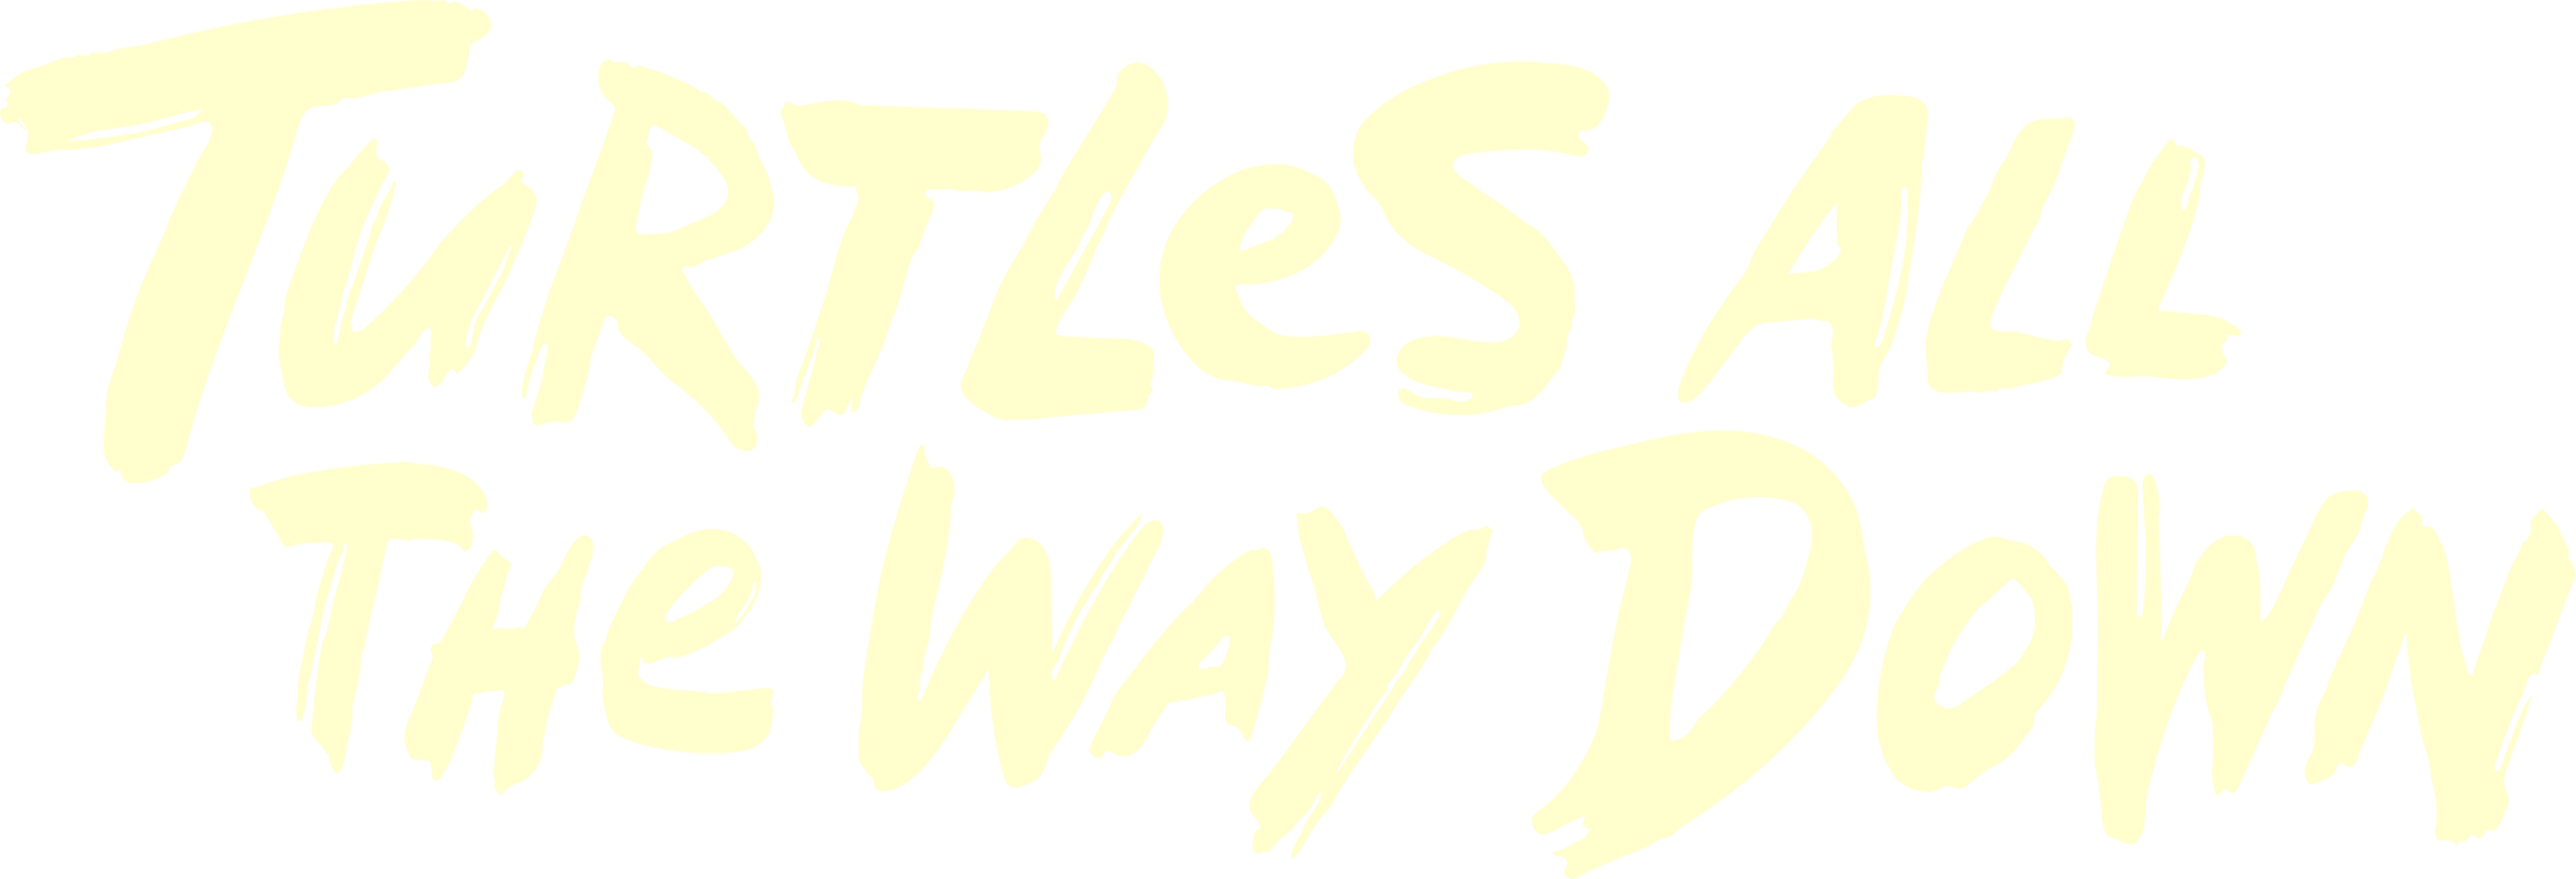 Turtles All the Way Down logo